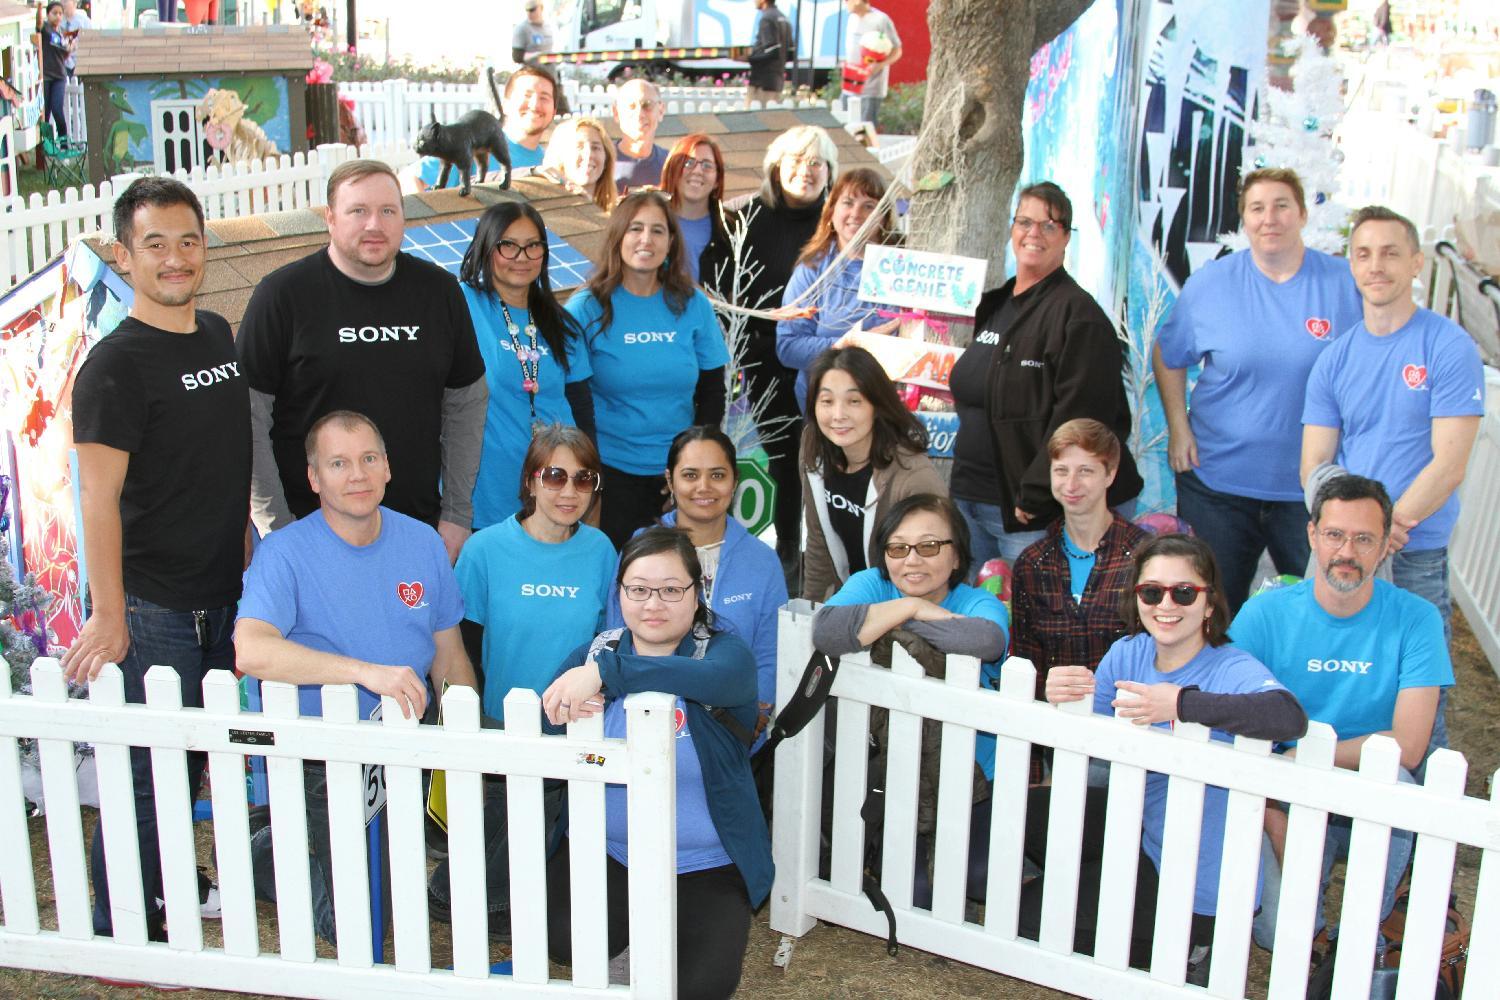 Group of Sony San Jose Employees at the Holidays in the park Charity Event